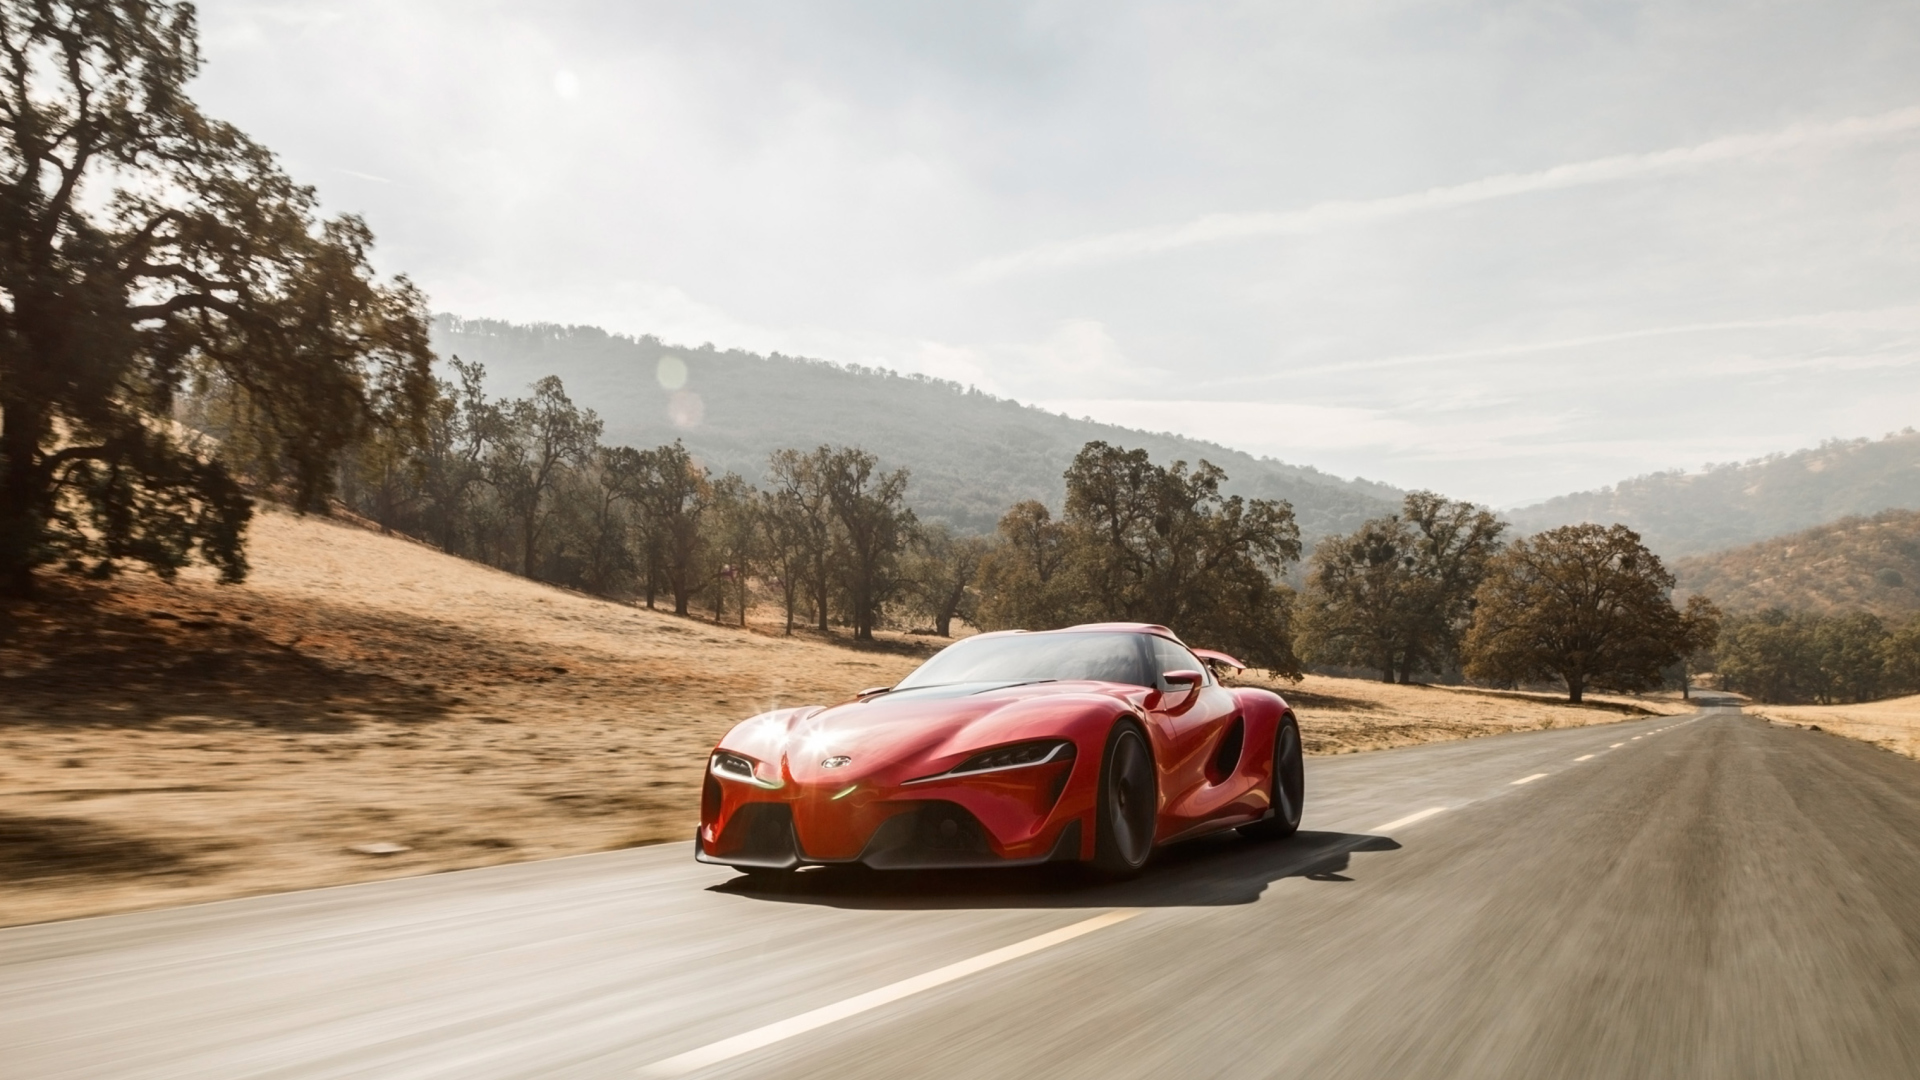 Das 2014 Toyota Ft 1 Concept Front Angle Wallpaper 1920x1080